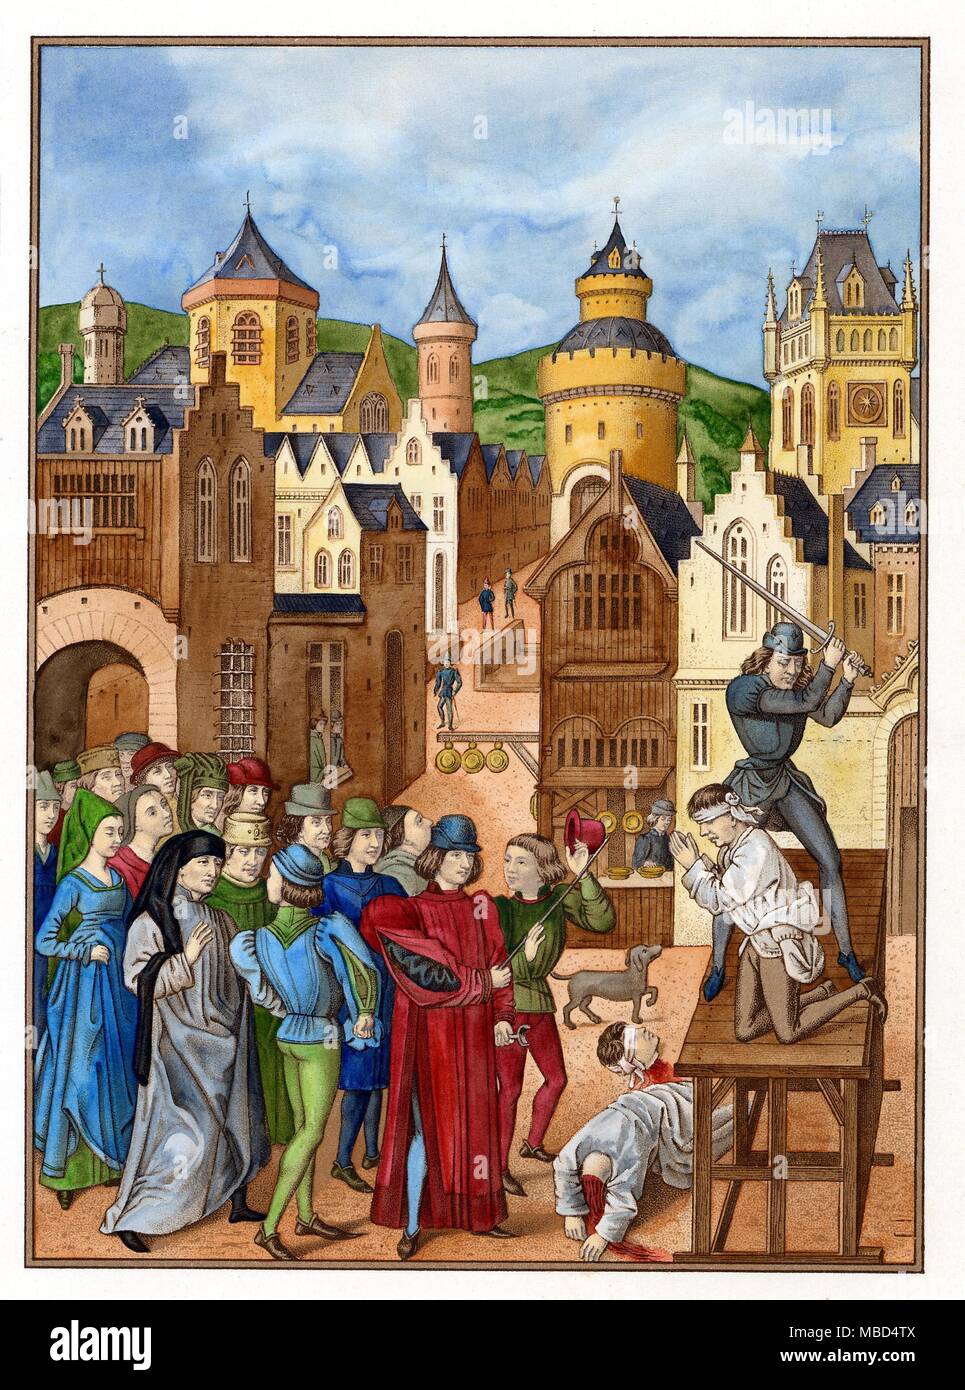 CAPITAL PUNISHMENT - BEHEADING - TORTURE The decapitation of William of Pommiers (Guillaume de Pommiers) and his confessor, at Bordeaux in 1377. The beheading took place on the instructions of the King of England's Lieutenant. Lithograph based on an illumination in Froissart;s Chronicles, manuscript No. 2644 in Bibl. Nat., Paris. Stock Photo